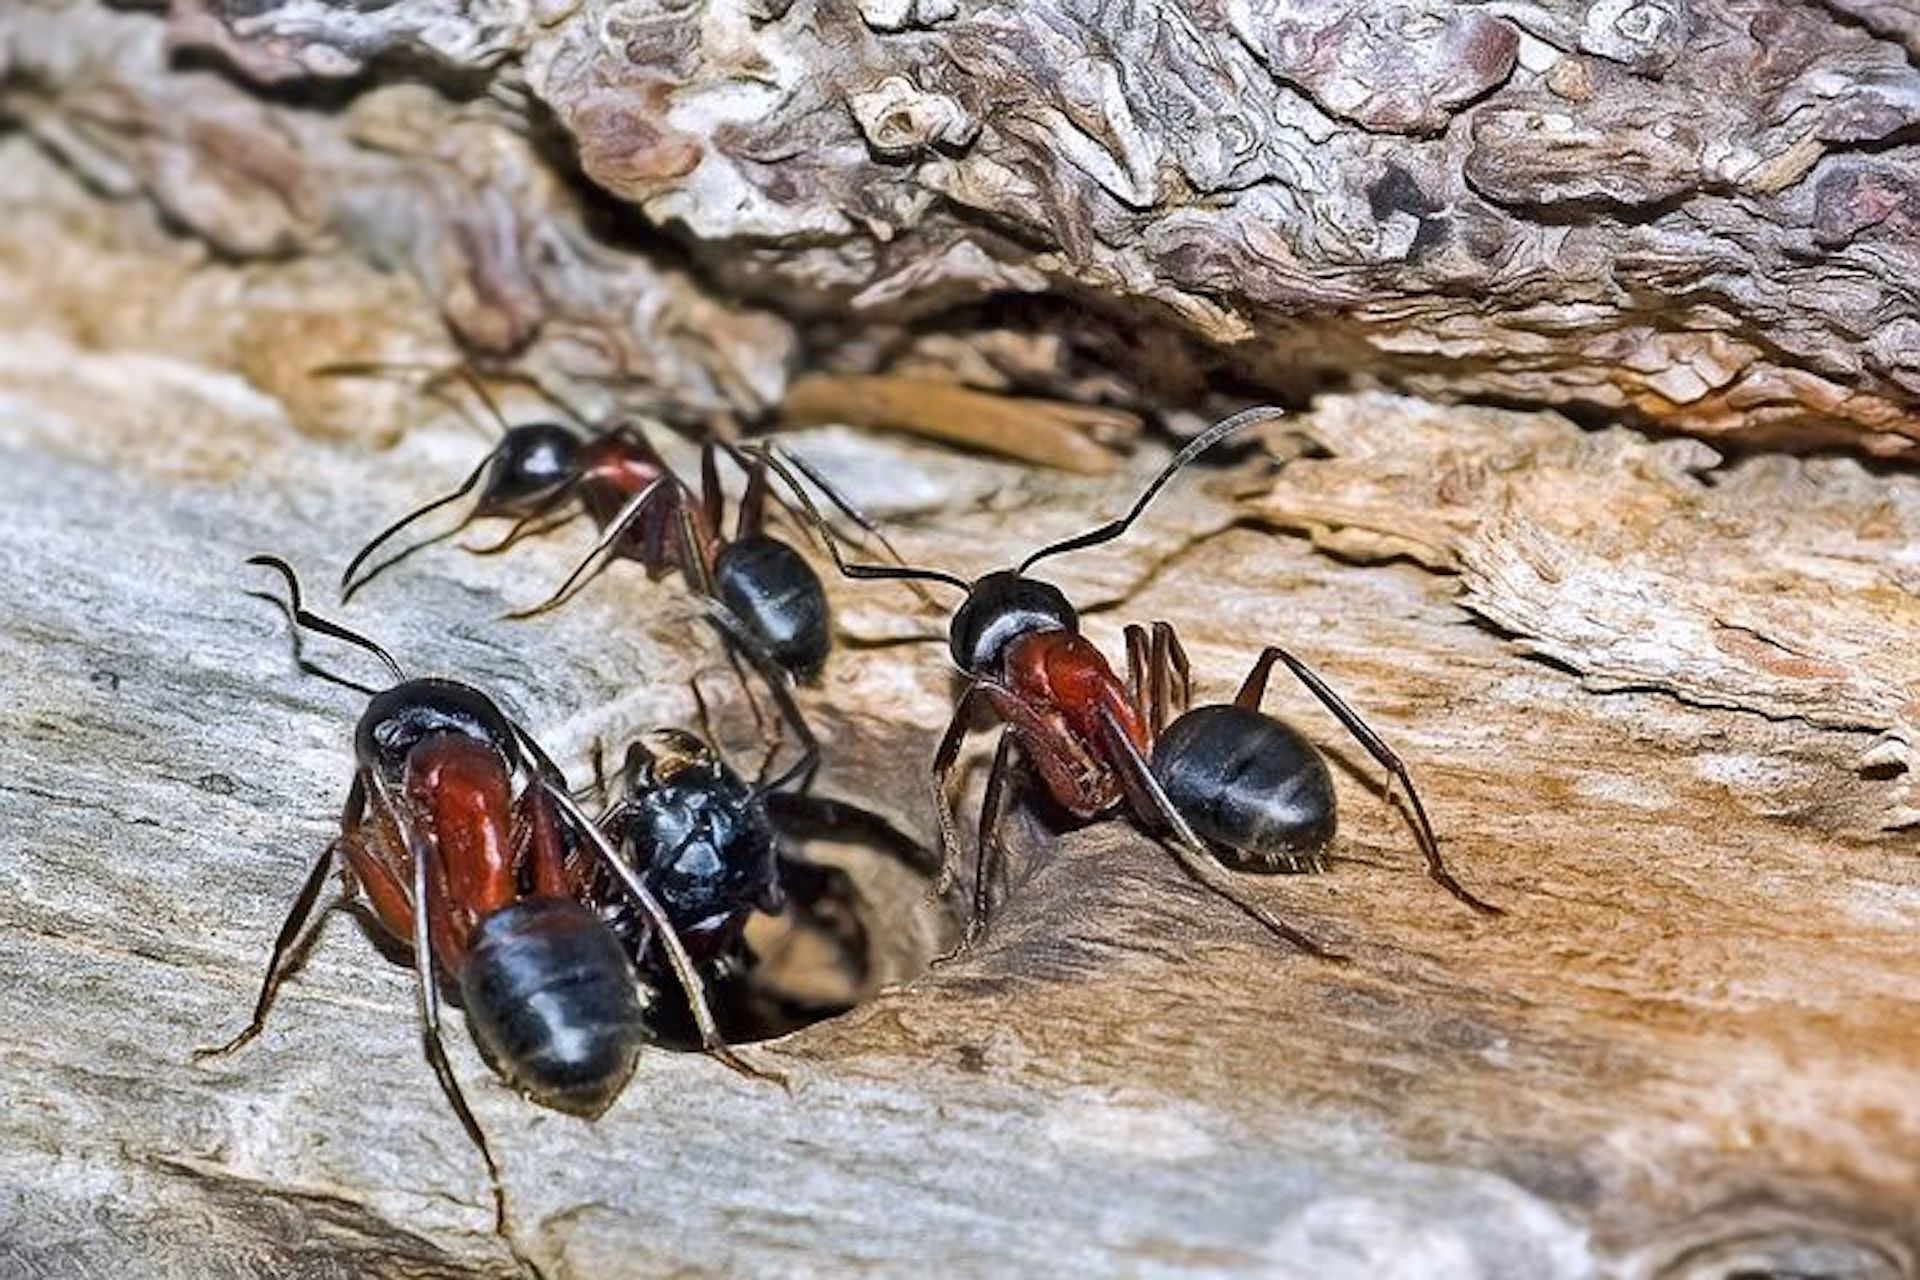 Carpenter ants are a troublesome pest